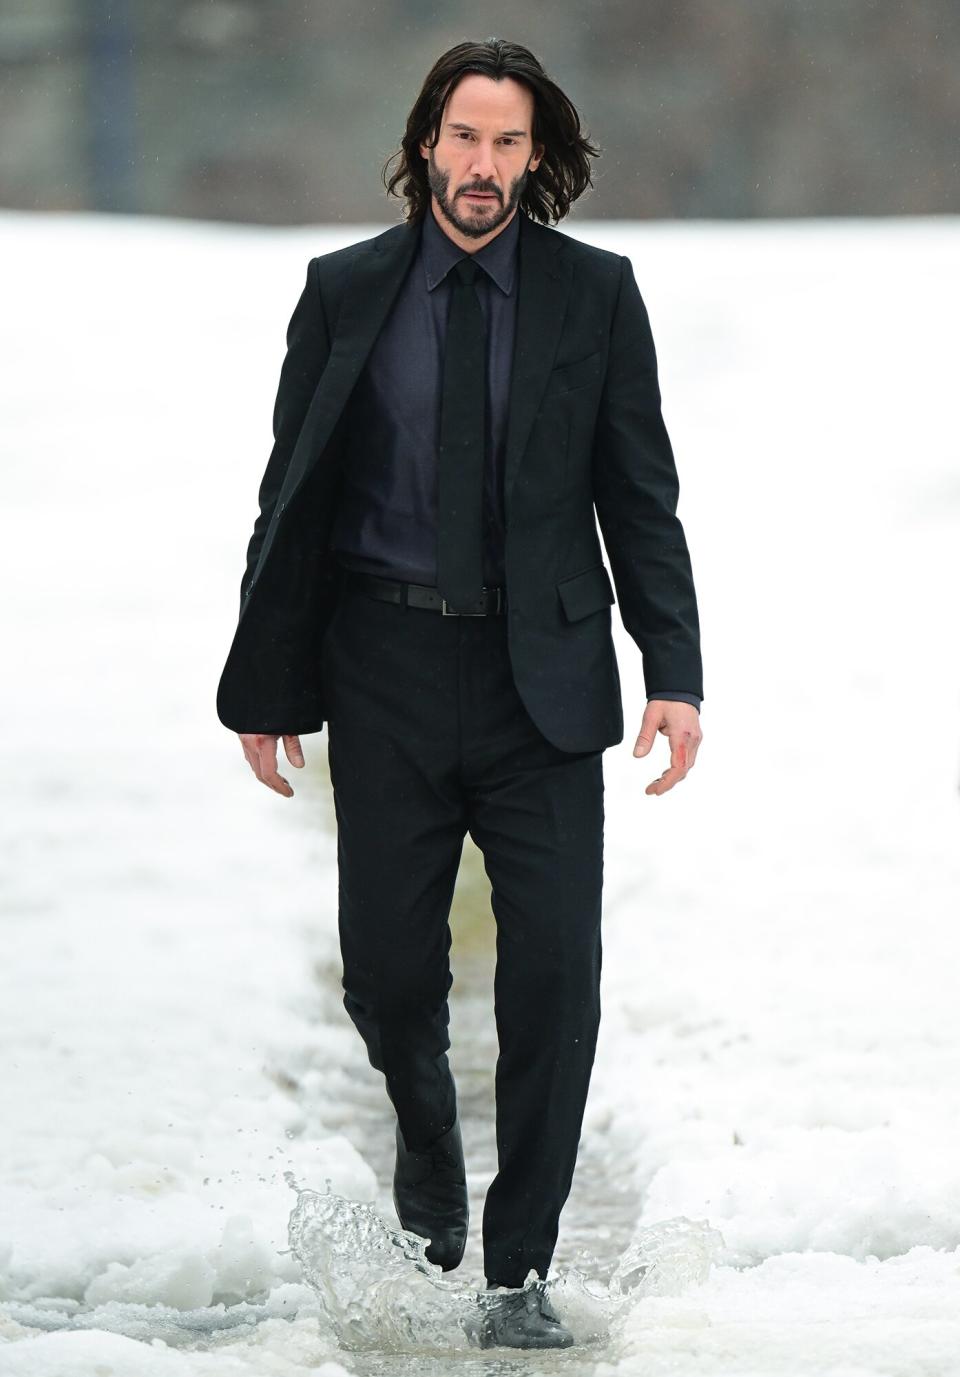 Keanu Reeves is seen filming on location for 'John Wick 4' on Roosevelt Island on February 03, 2022 in New York City